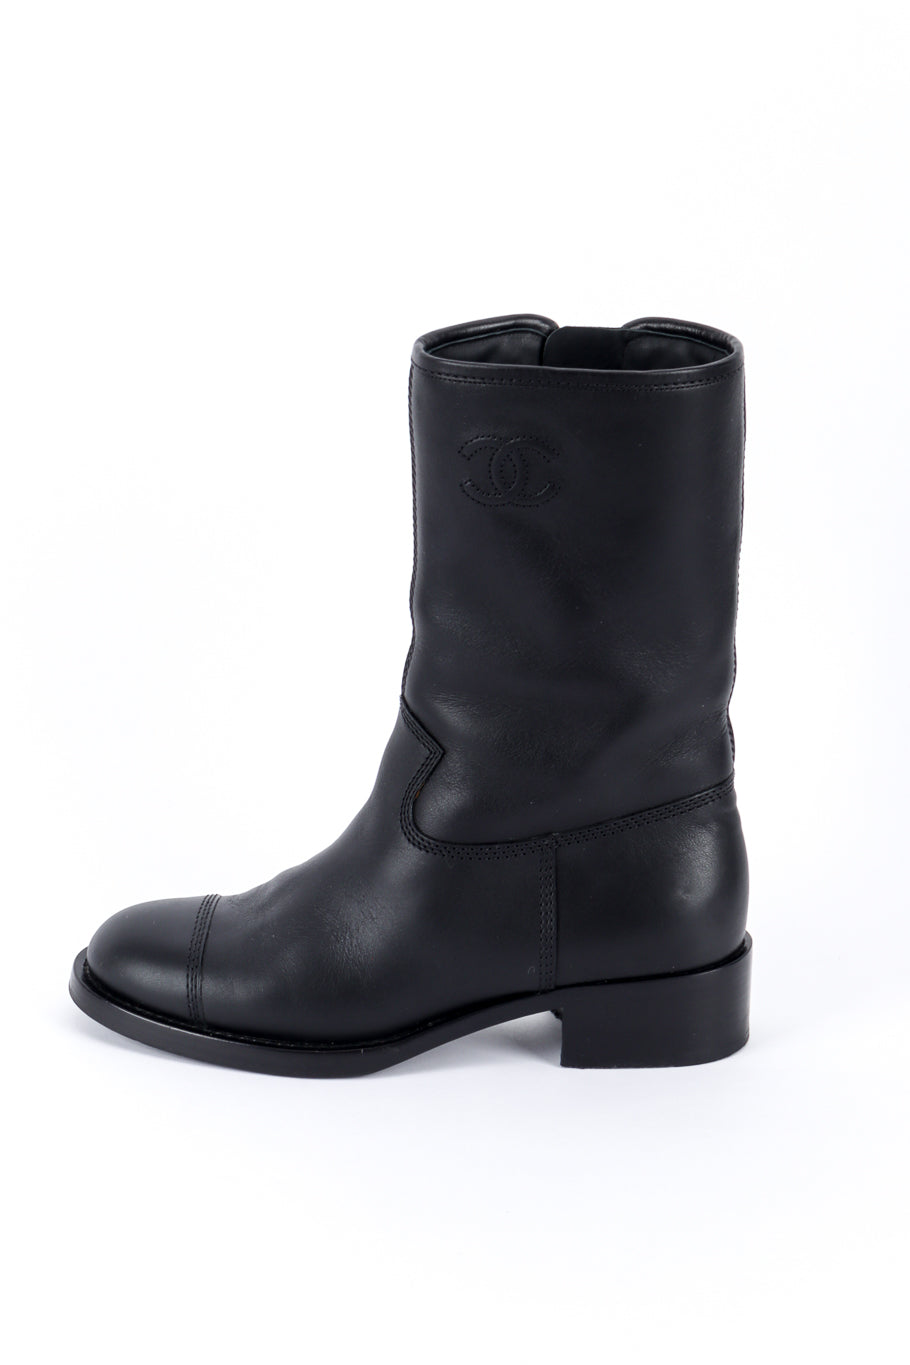 Chanel CC Quilted Mid-Calf Boots left shoe outer side @recess la